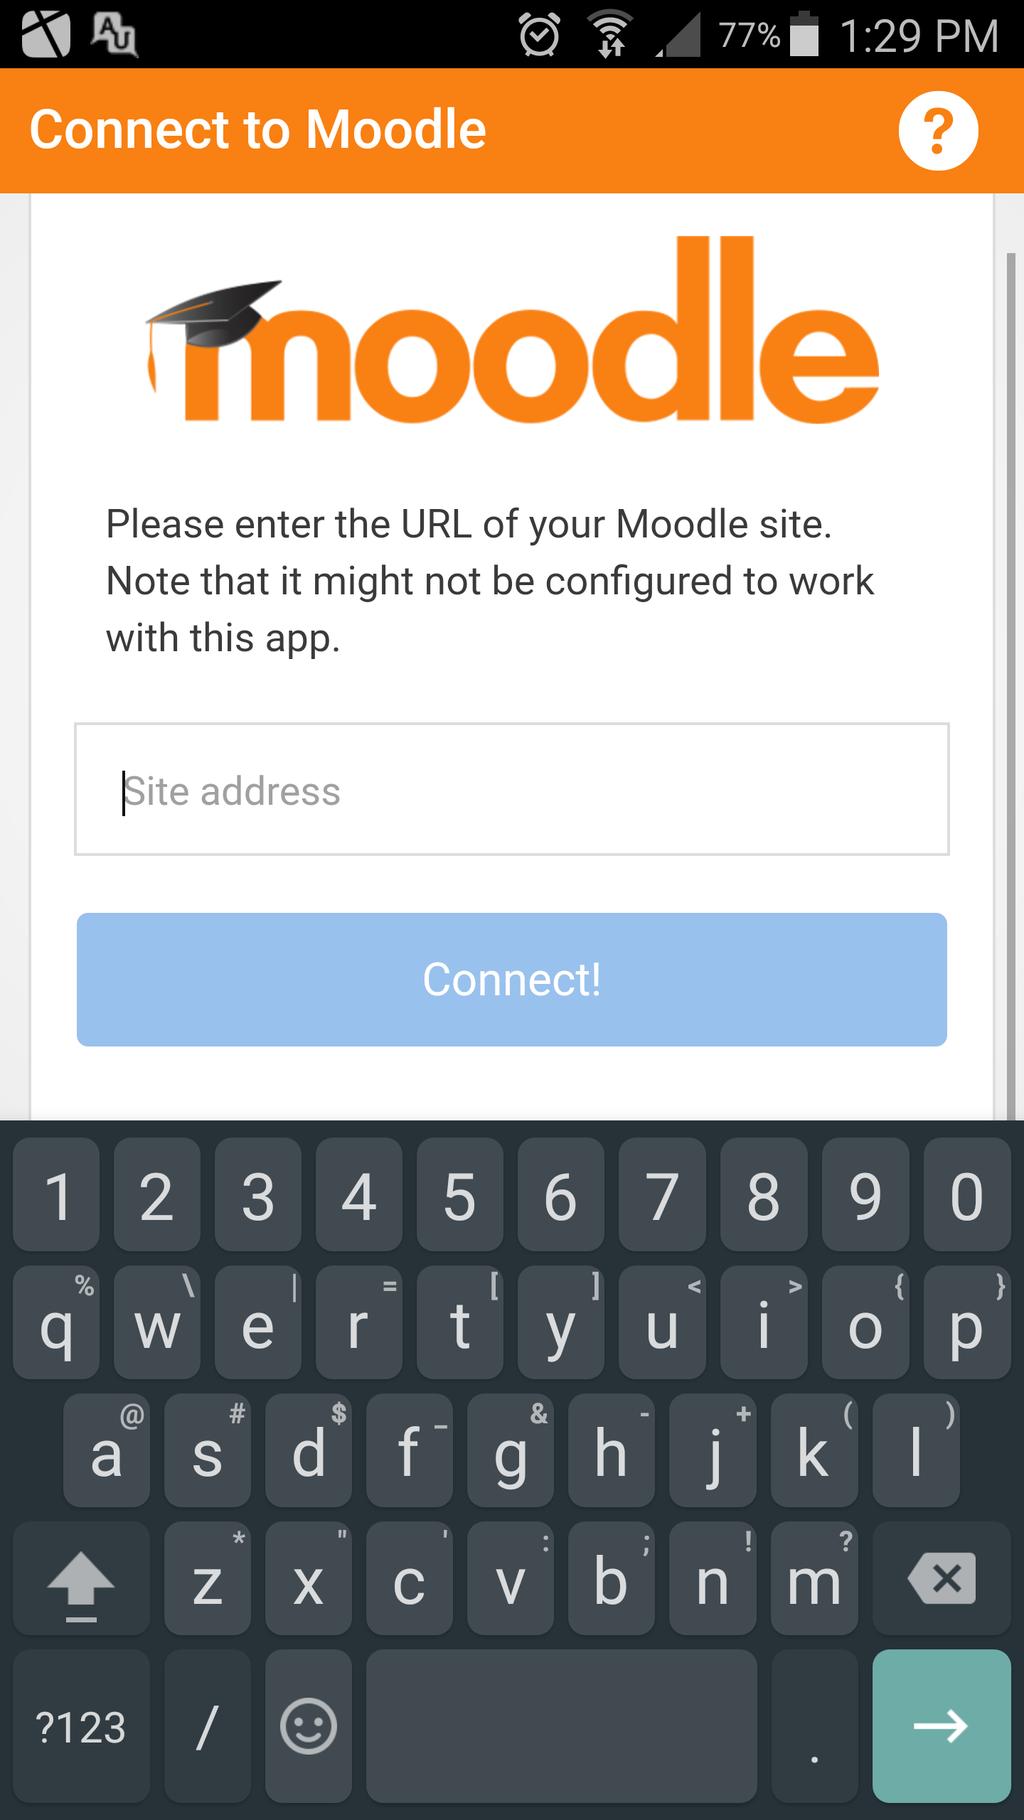 Once you have installed and opened the app, you will see this screen: Step 1: In Site address, enter: moodle.